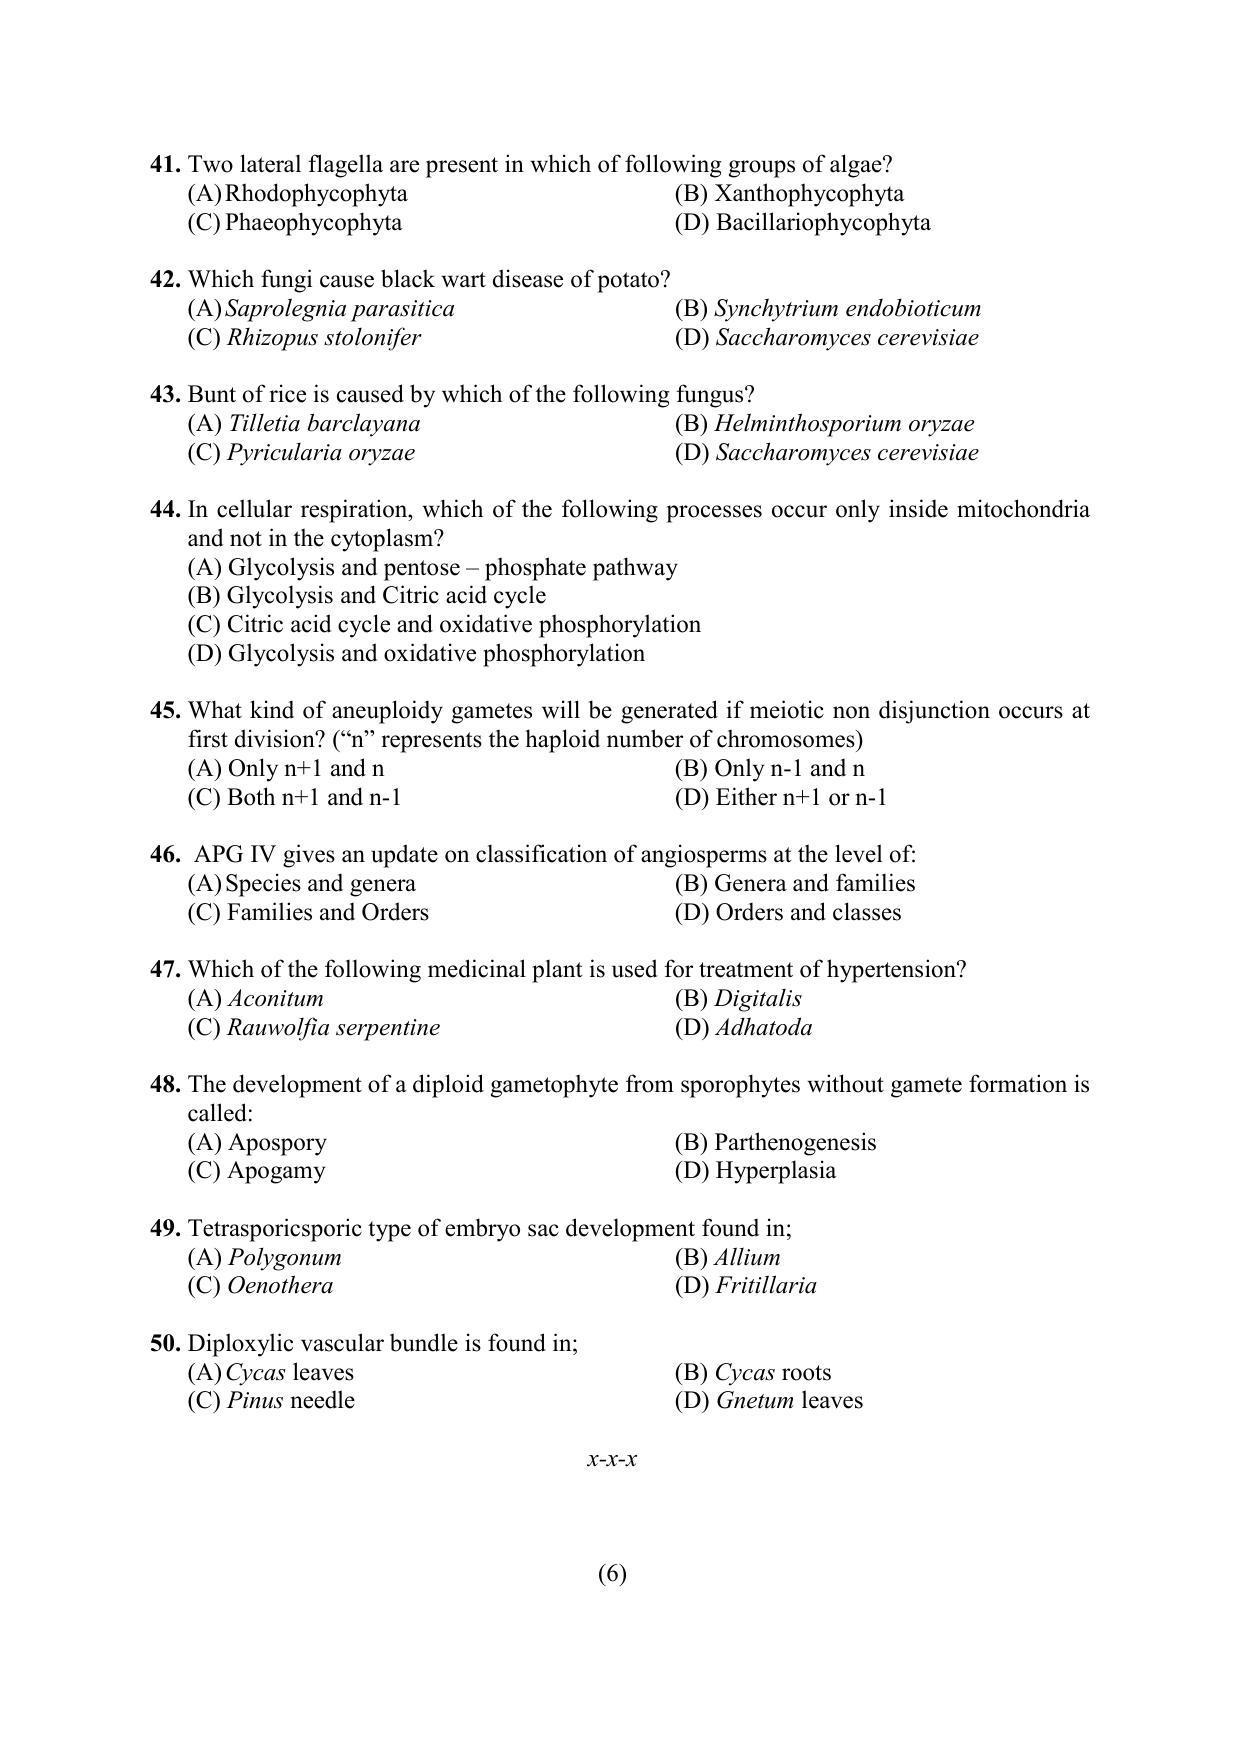 PU MPET Anthropology 2022 Question Papers - Page 23